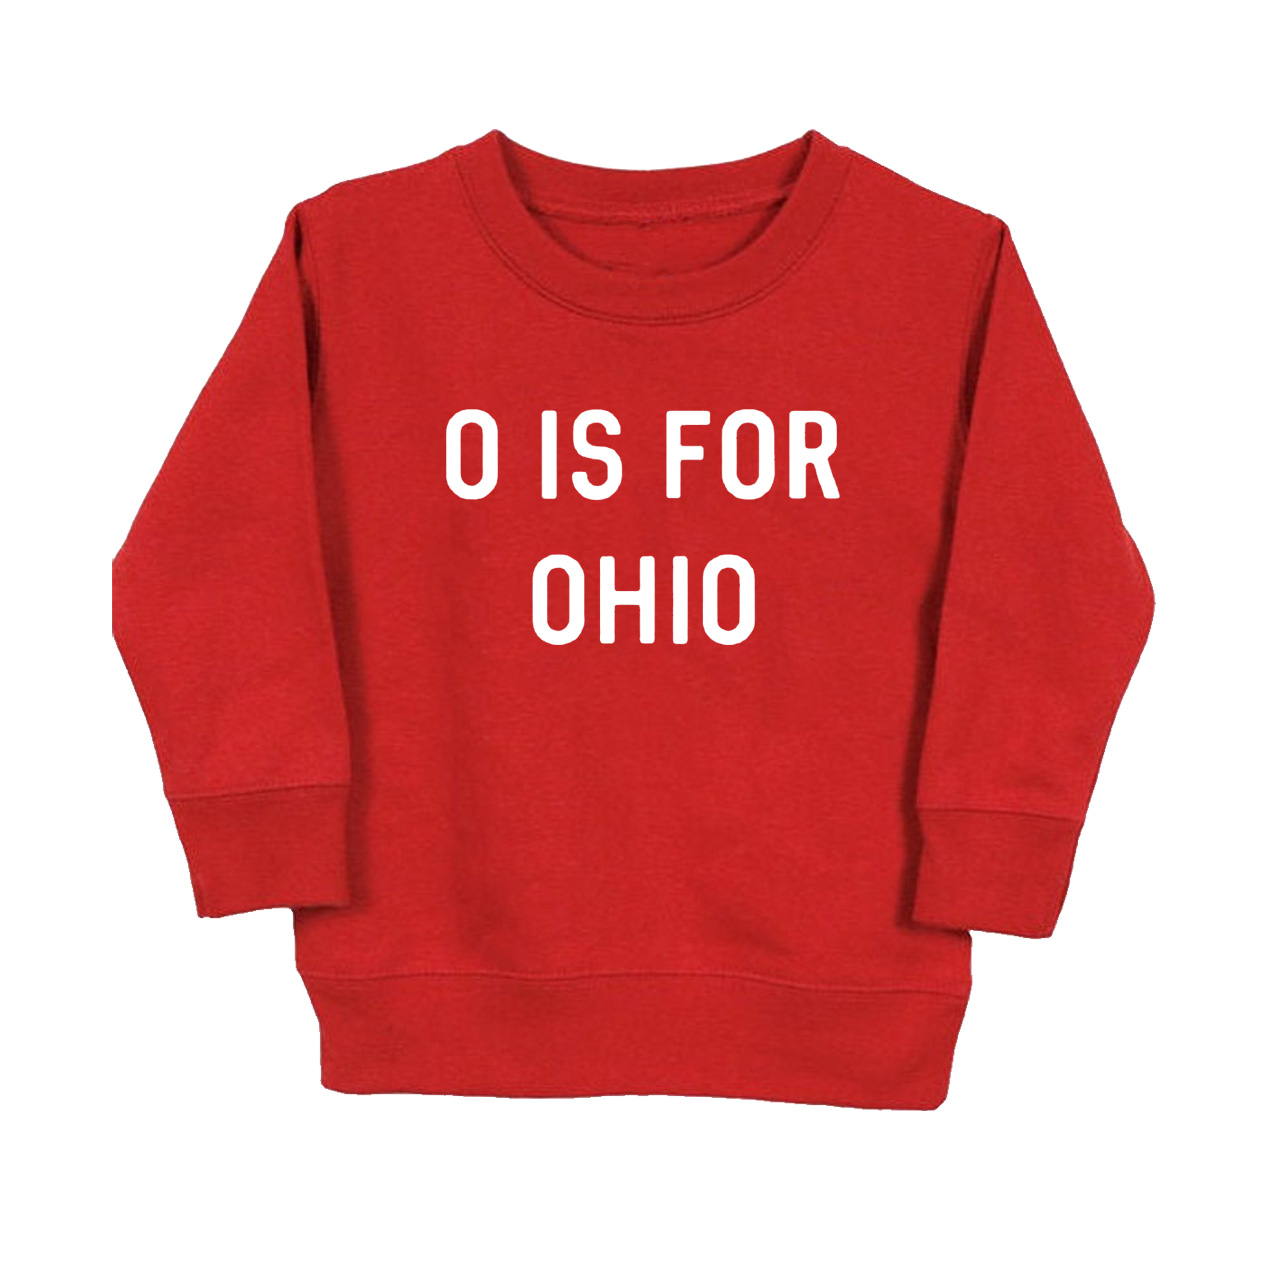 N IS FOR NAME Sweatshirt For Kids